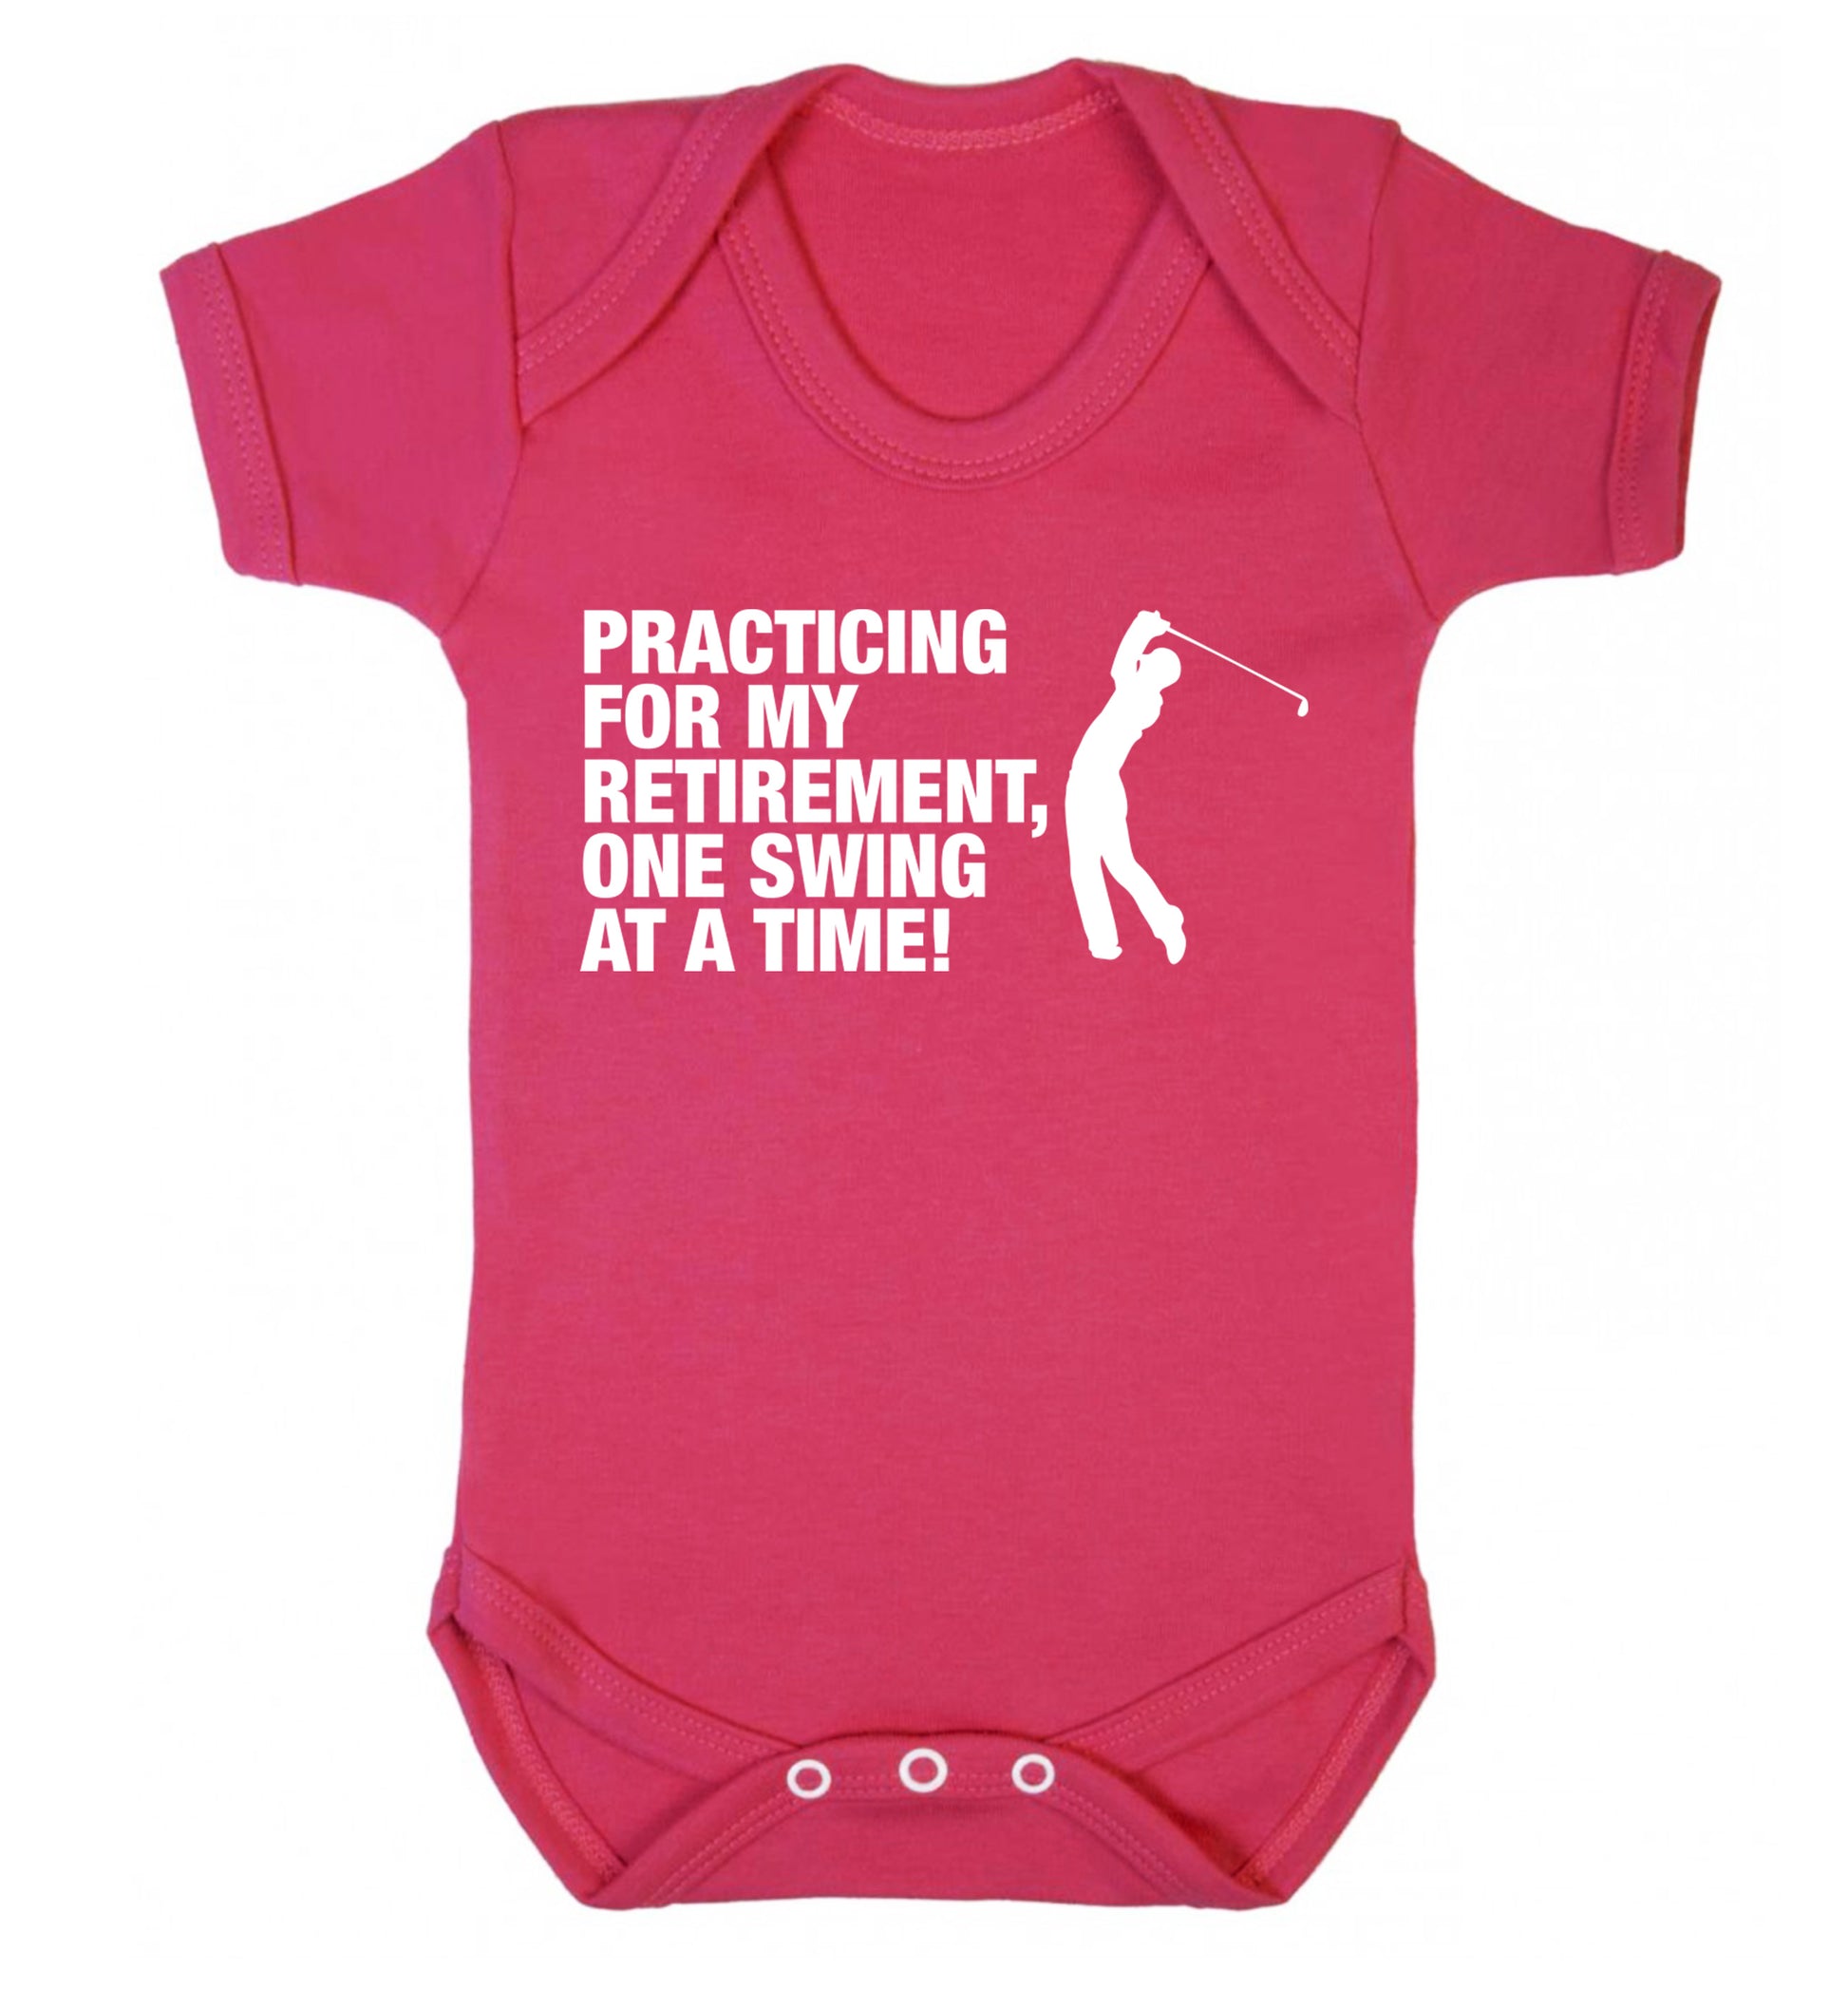 Practicing for my retirement one swing at a time Baby Vest dark pink 18-24 months